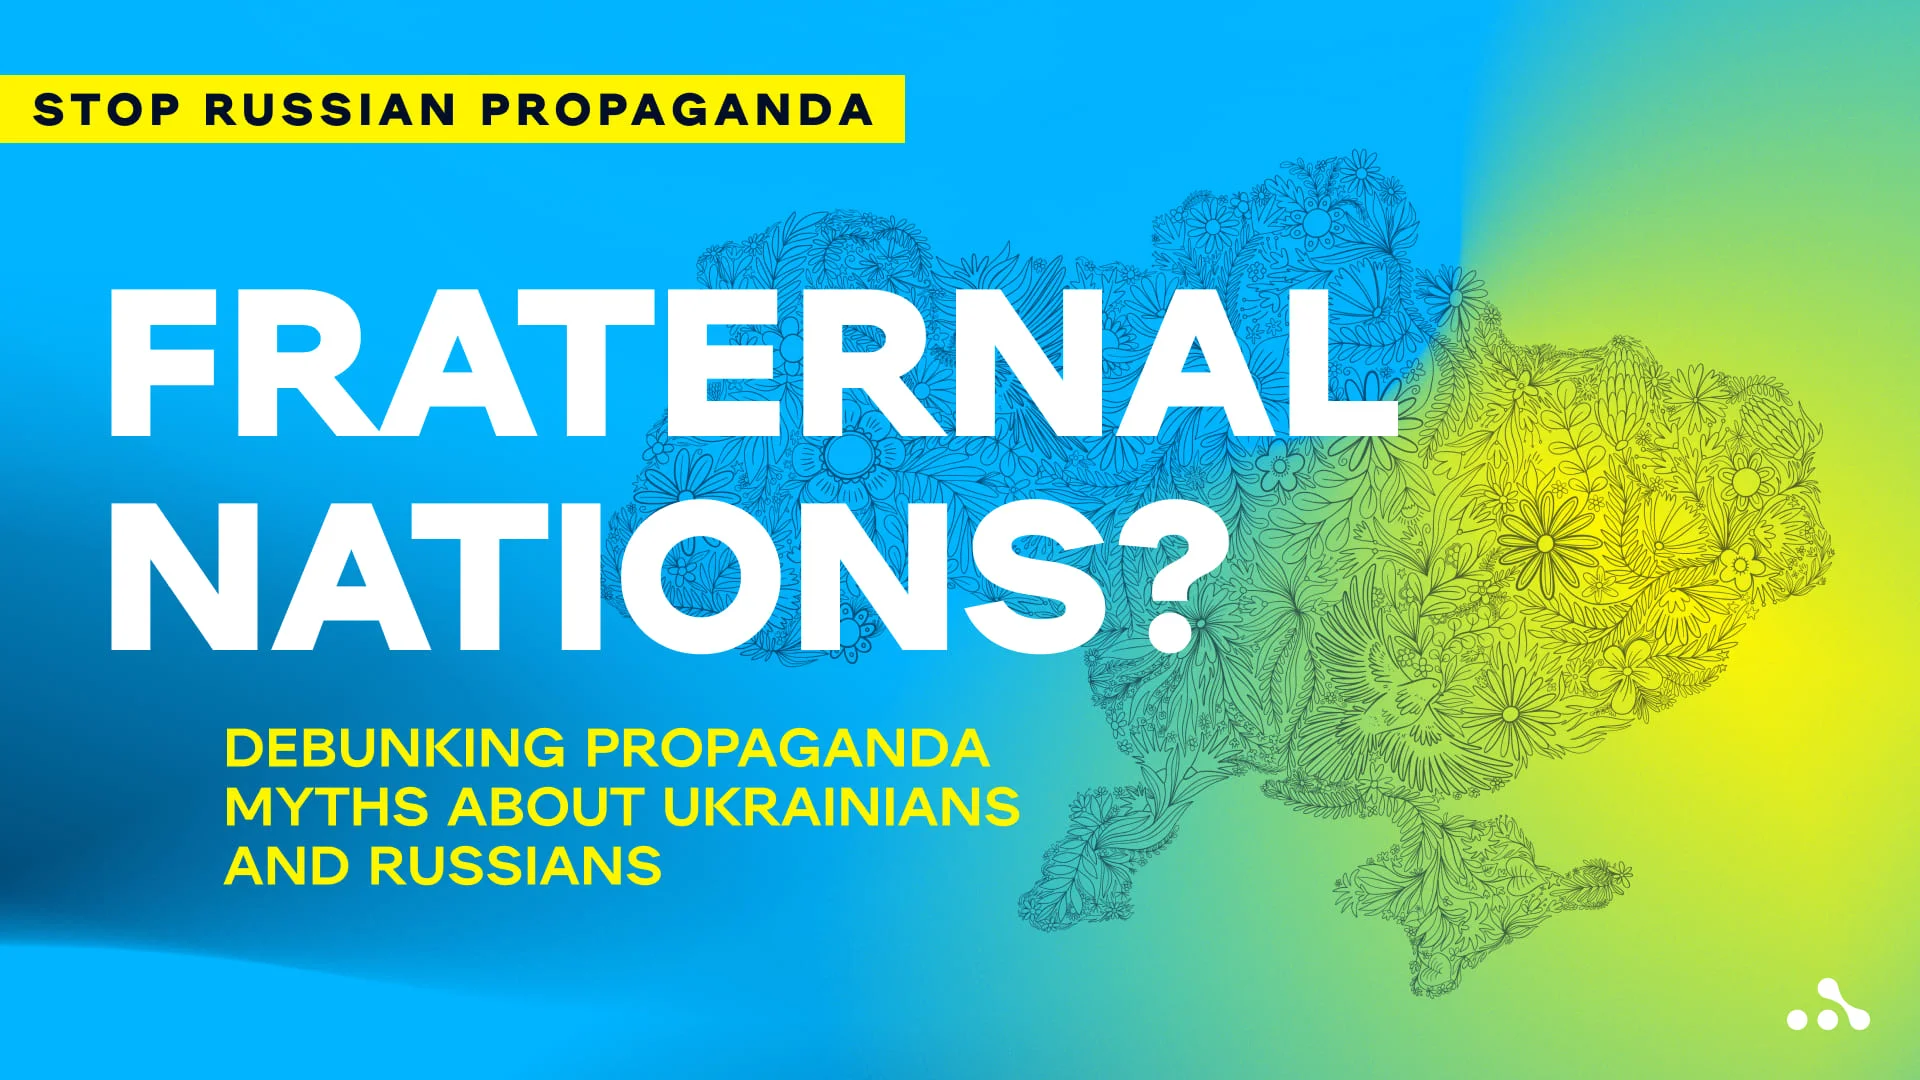 Fraternal nations? Debunking propaganda myths about Ukrainians and russians. Credit: WePlay Holding